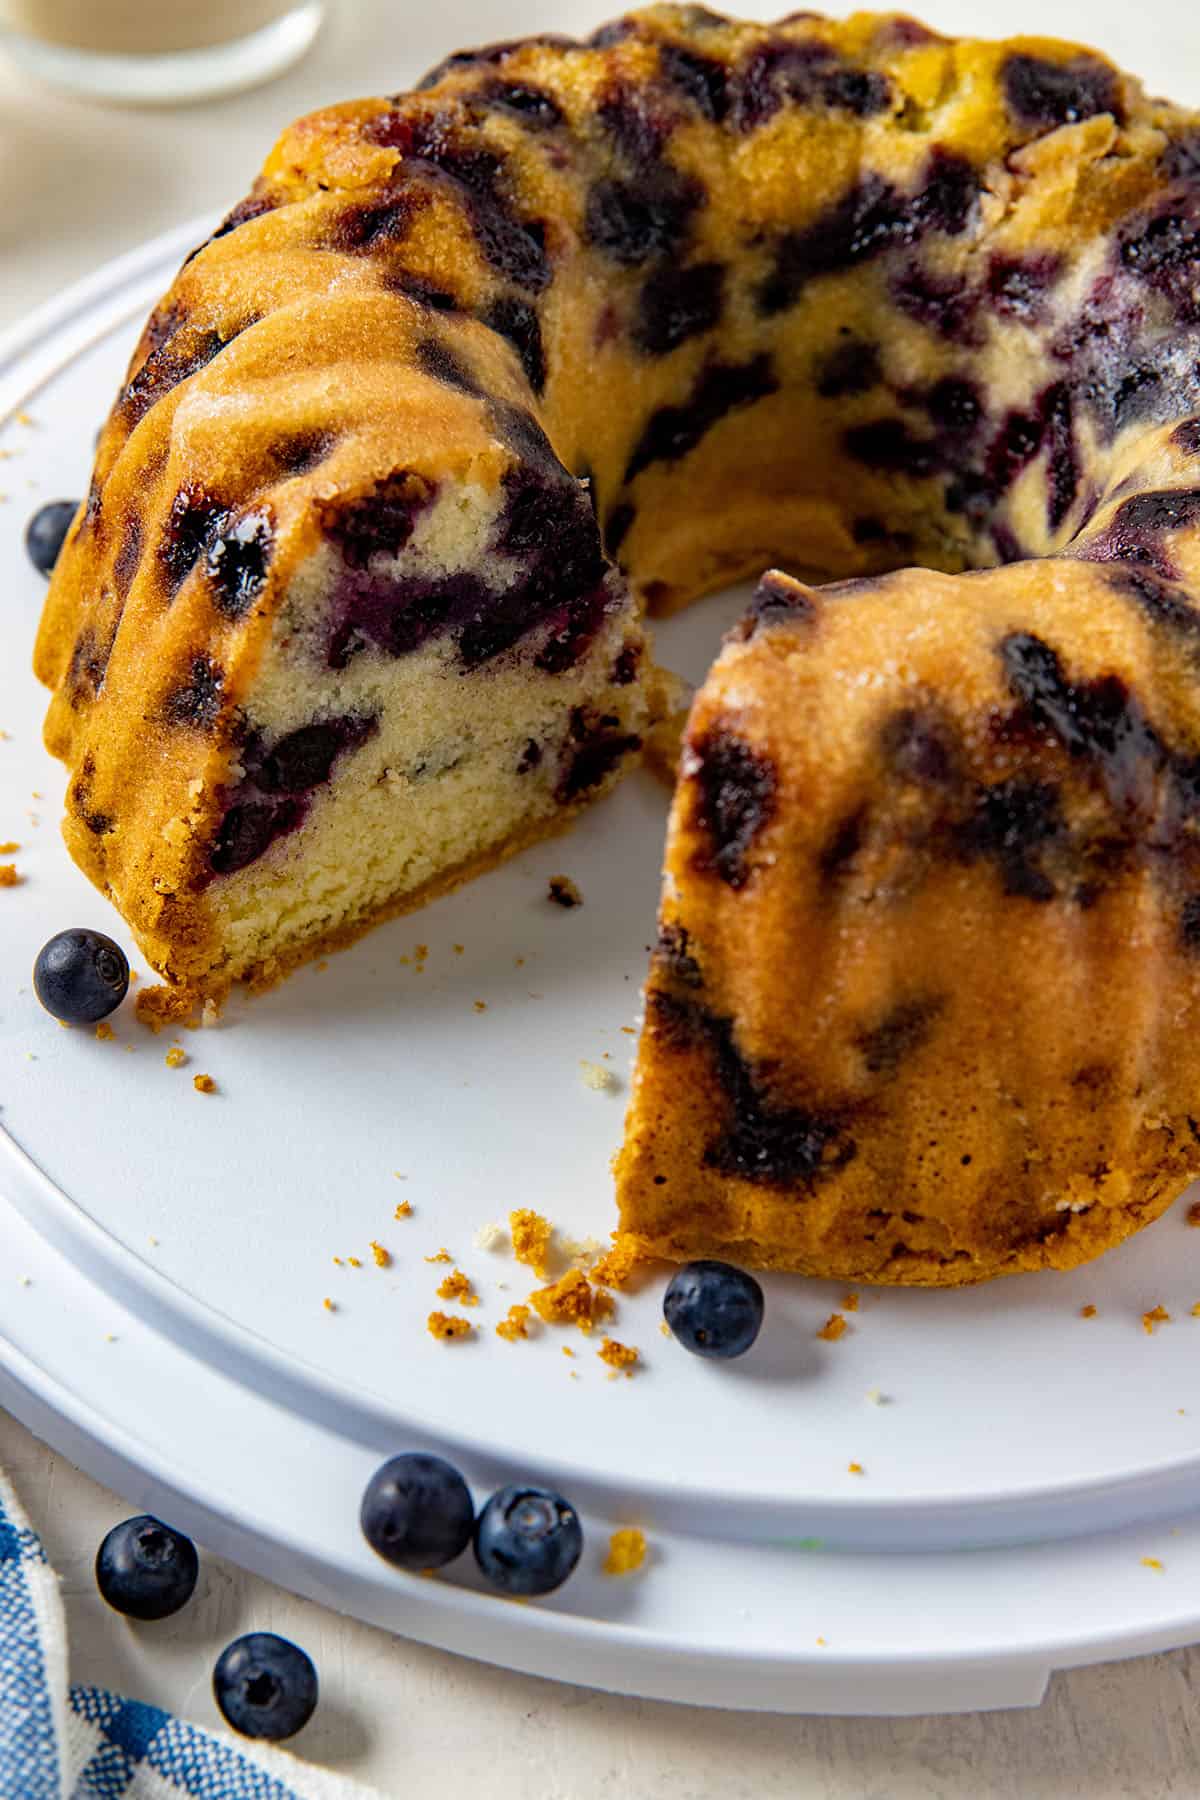 baked cake with one slice removed.  Cake on white cake holder with fresh blueberries scattered around.